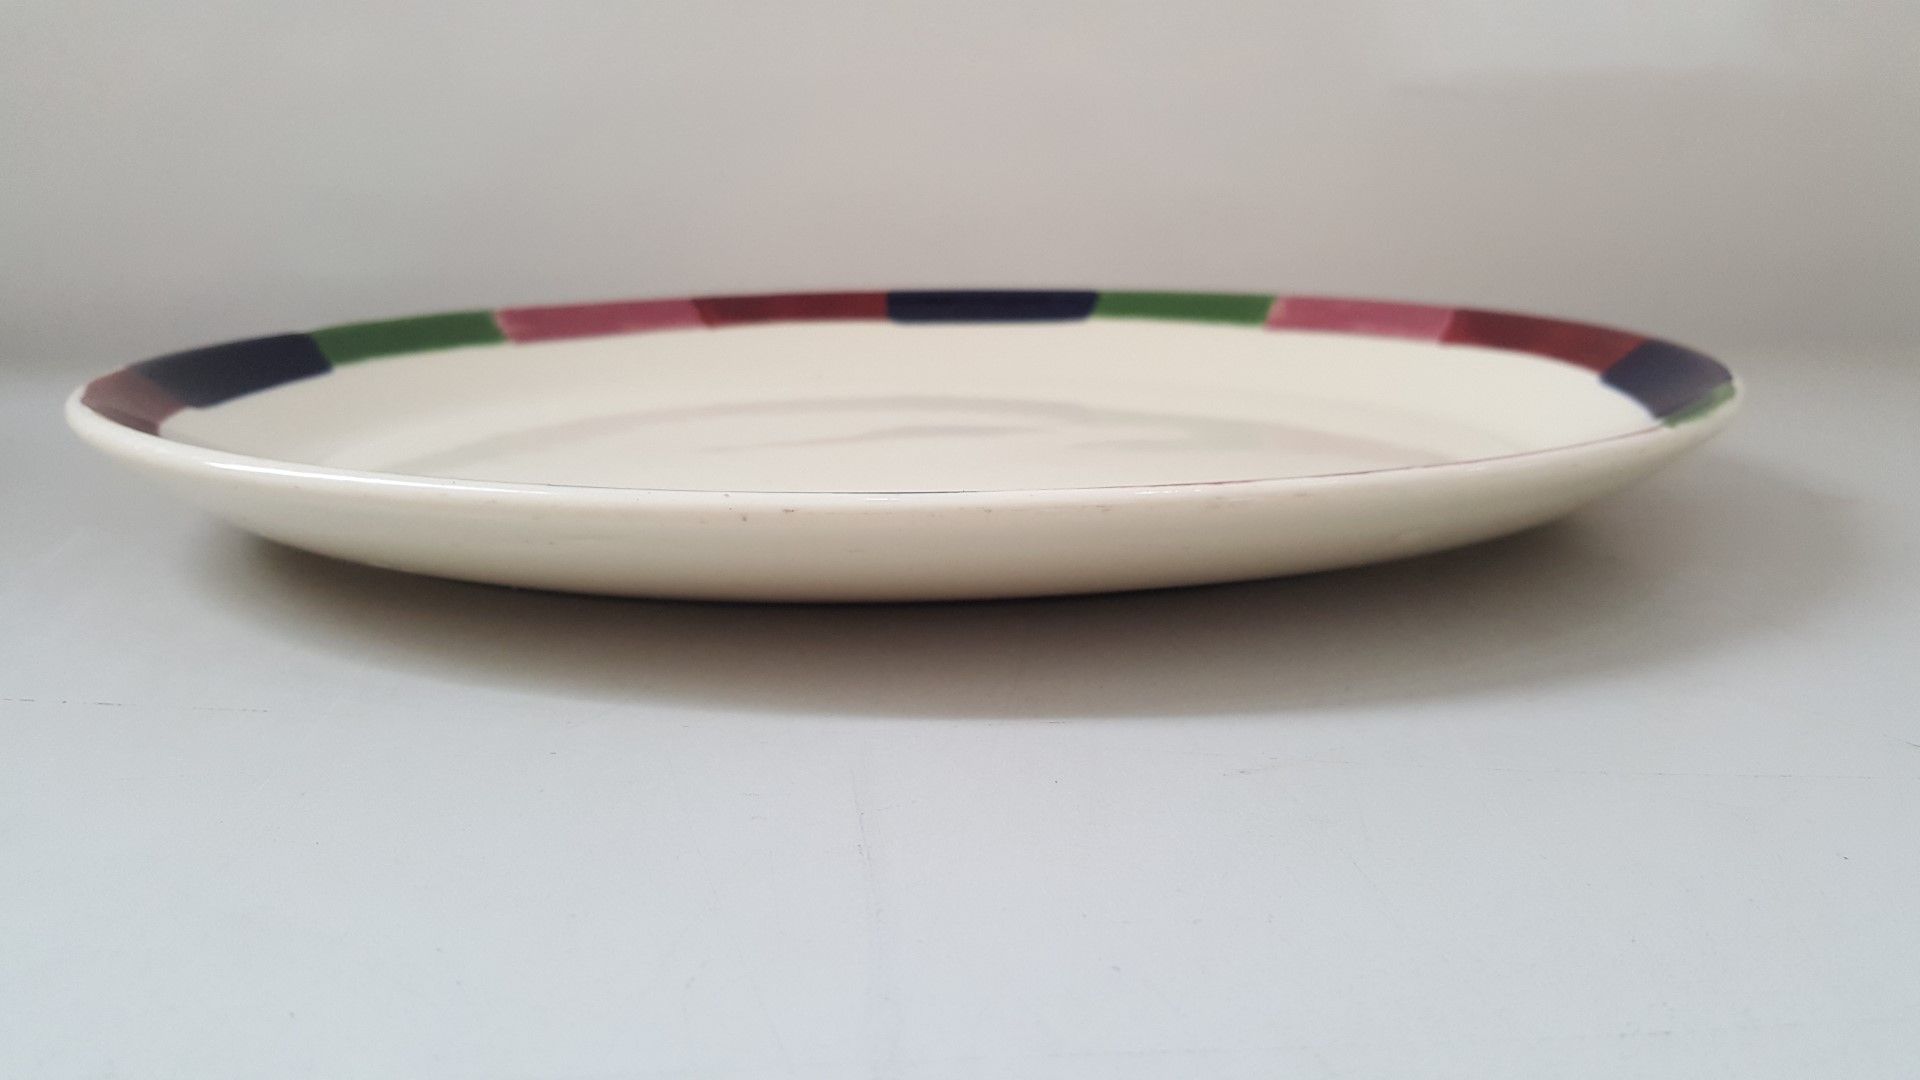 14 x Steelite Oval Serving Plates Cream With Patterned Edge L30/W23.5CM - Ref CQ270 - Image 2 of 4